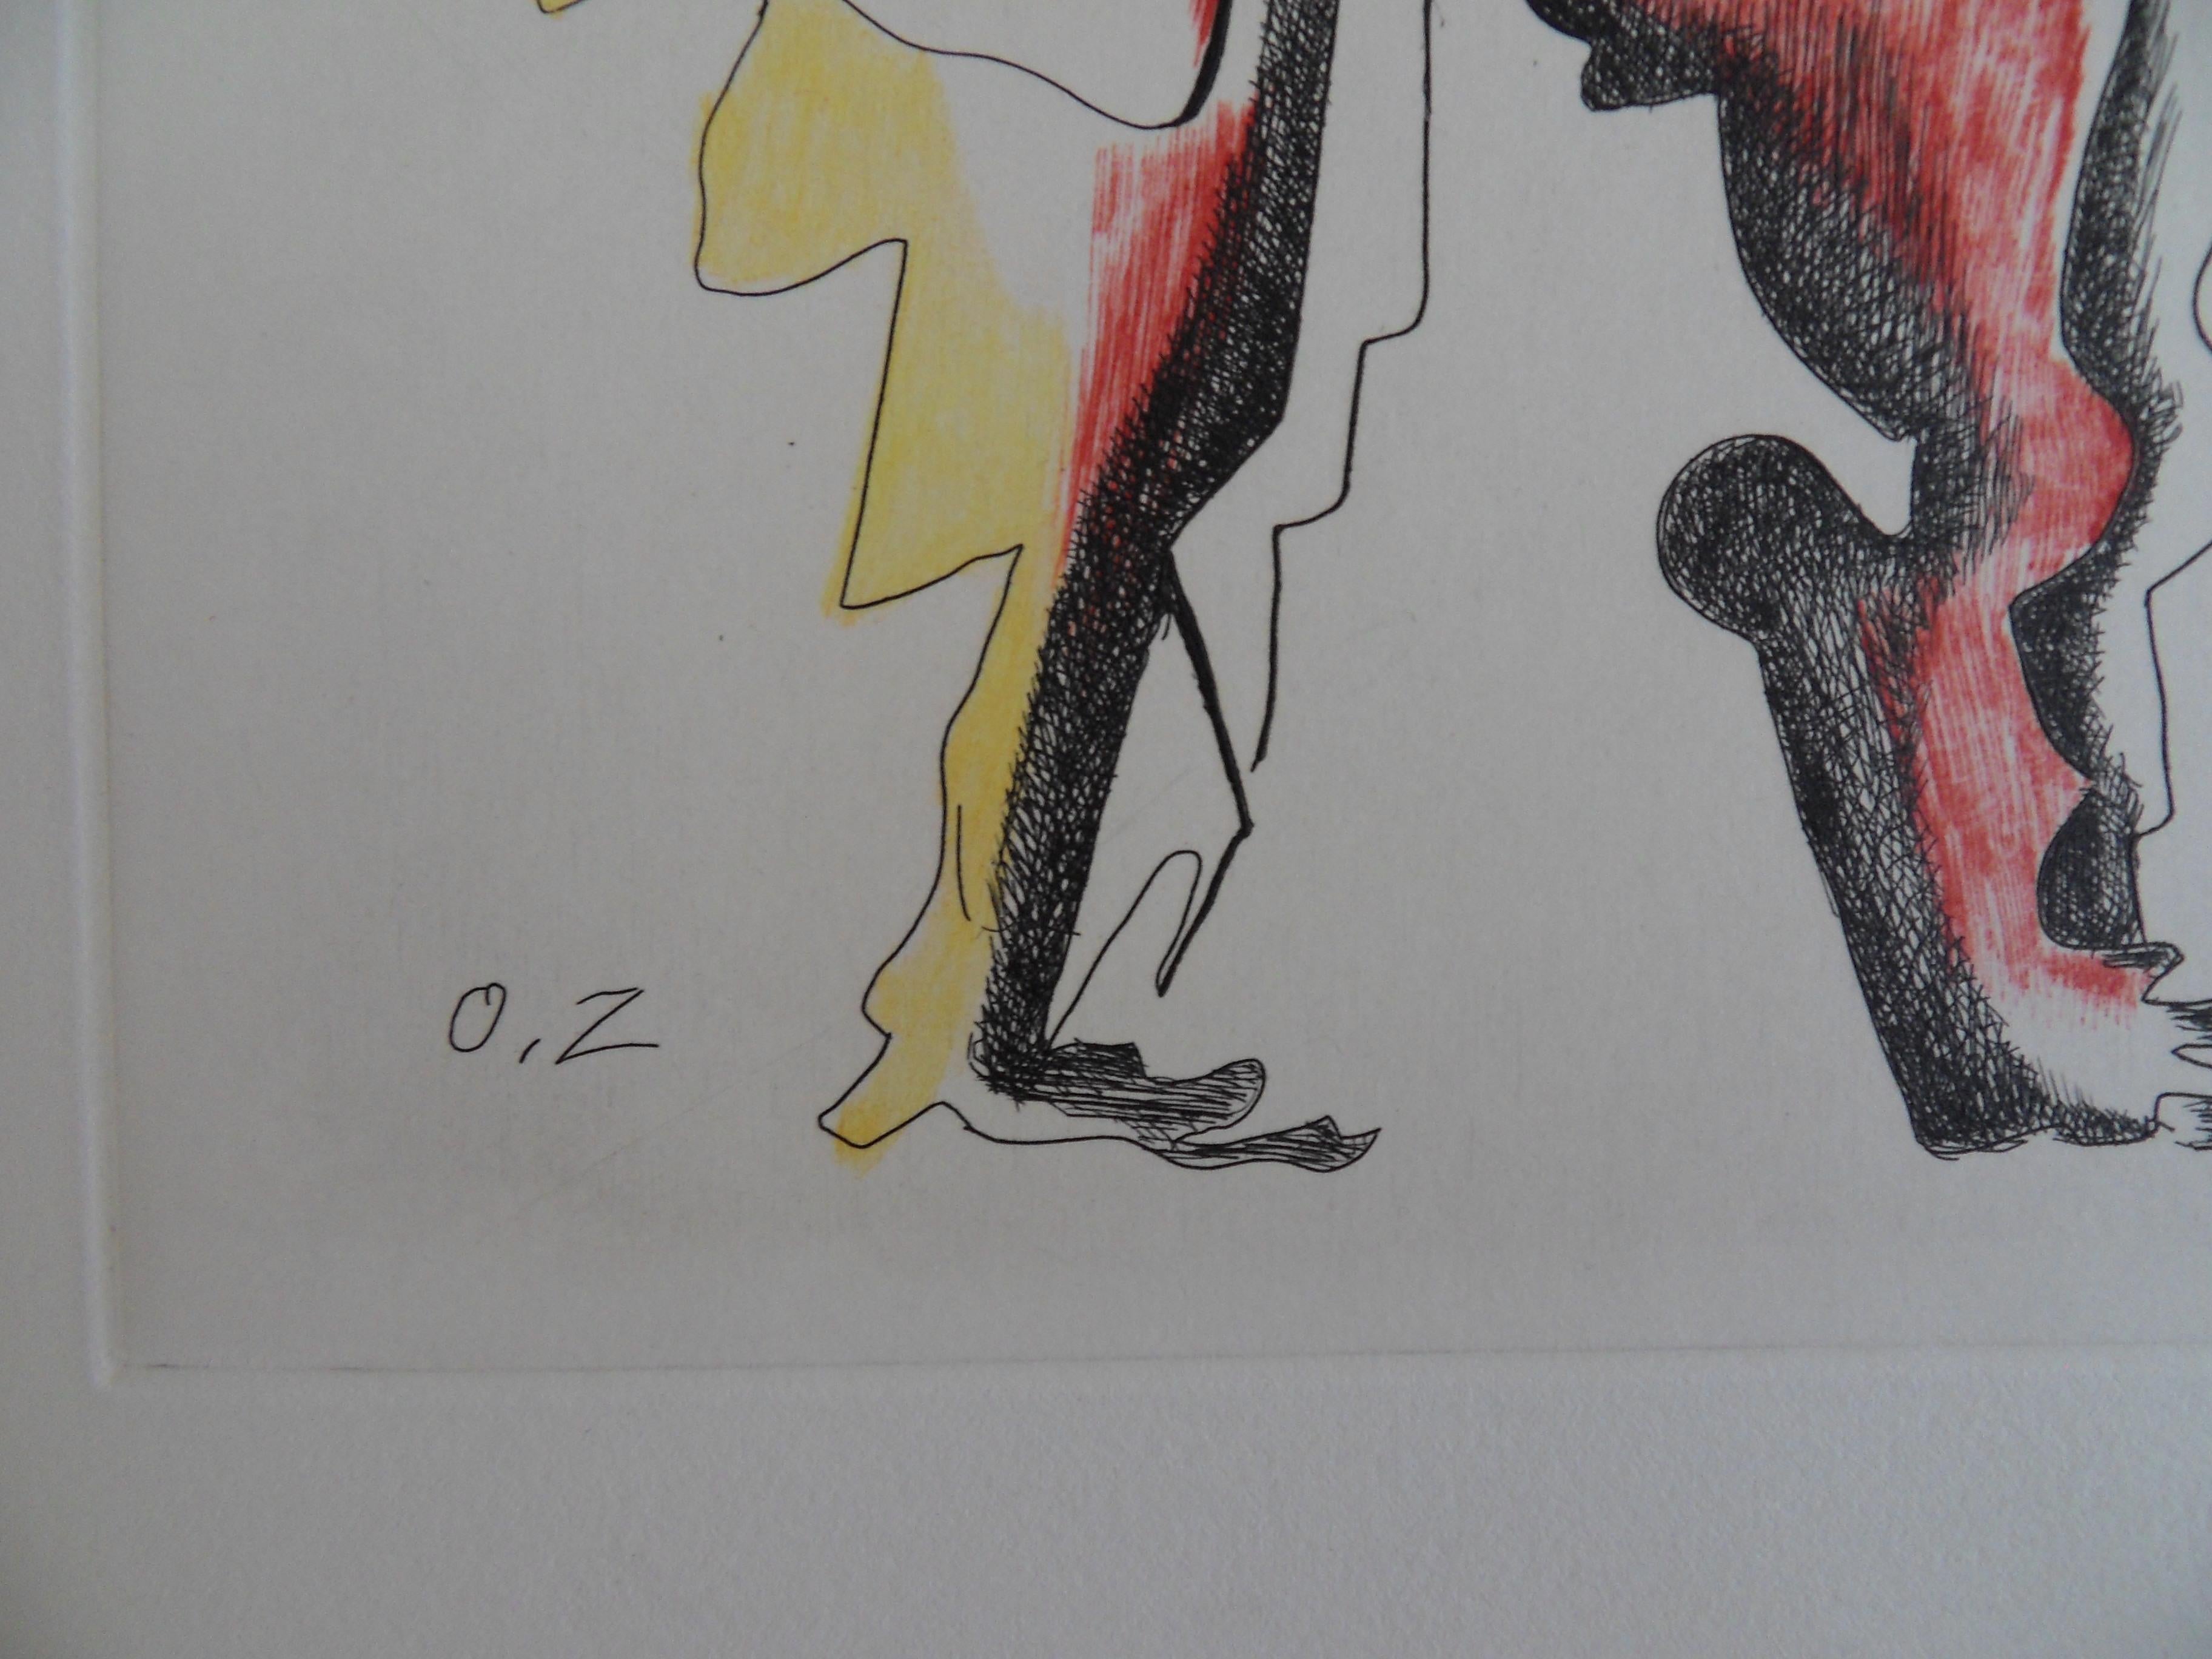 Man in Yellow and Red - Surrealist Original Etching - Print by Ossip Zadkine